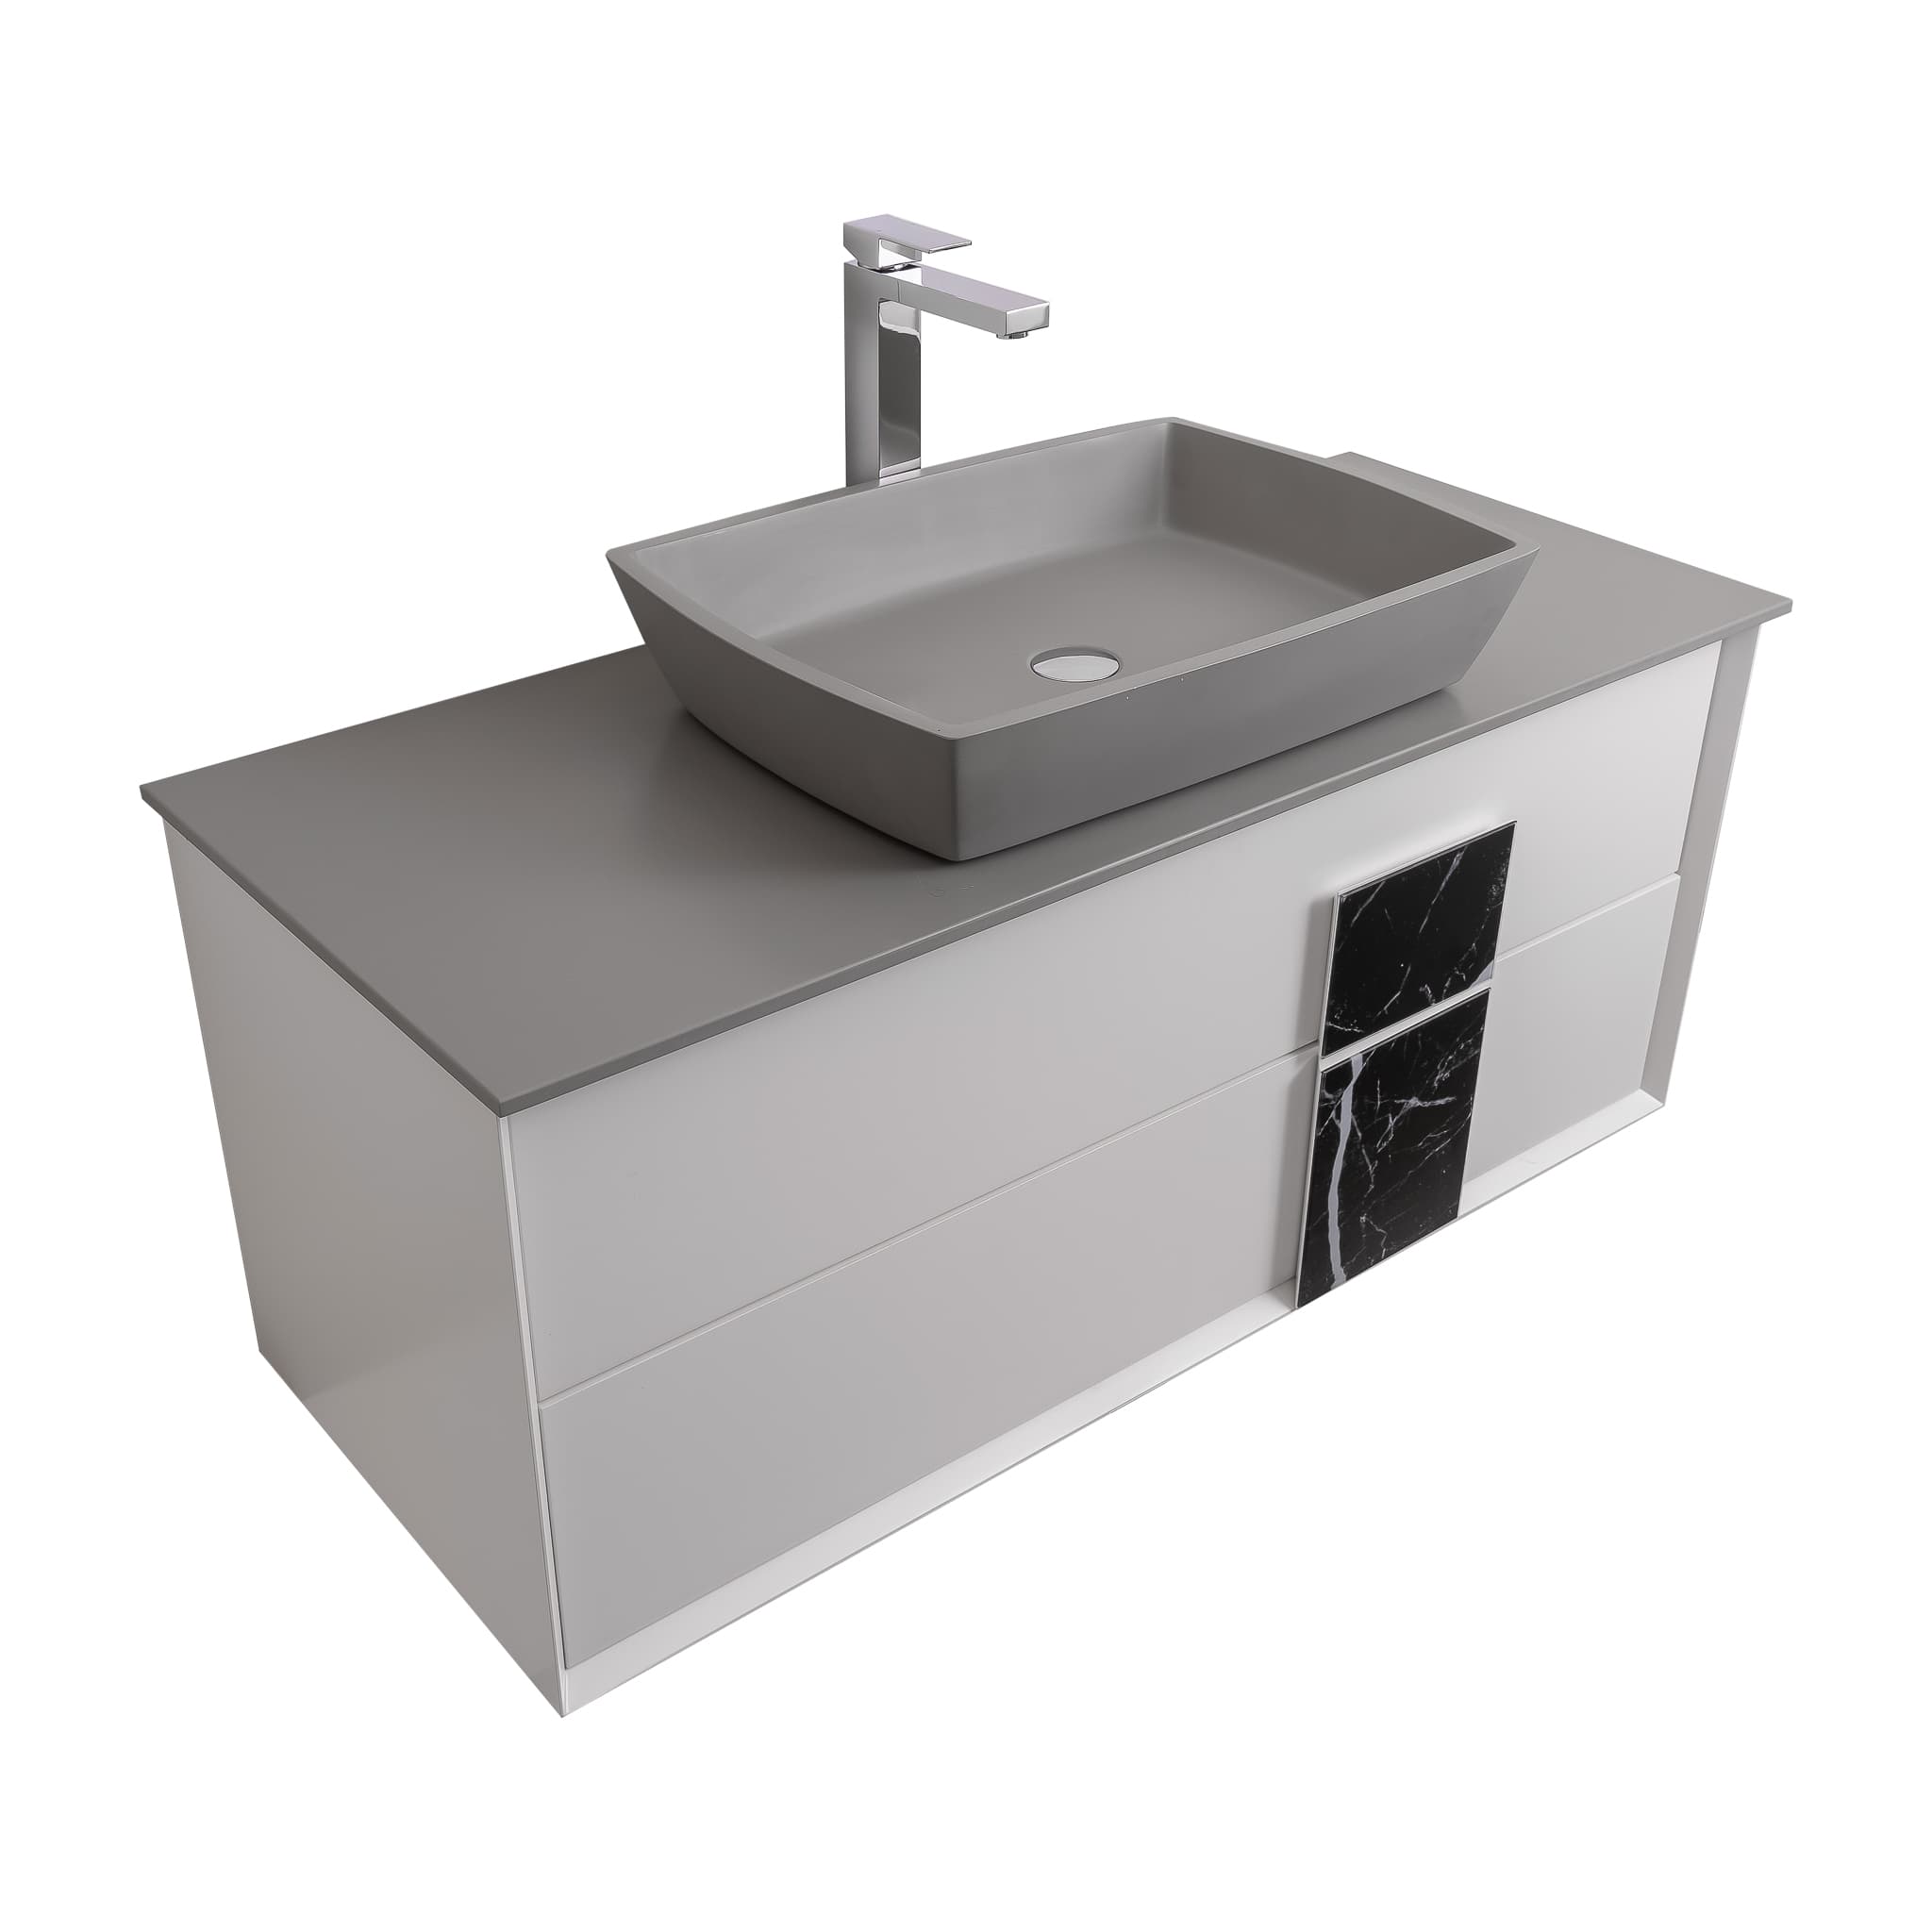 Piazza 47.5 Matte White With Black Marble Handle Cabinet, Solid Surface Flat Grey Counter and Square Solid Surface Grey Basin 1316, Wall Mounted Modern Vanity Set